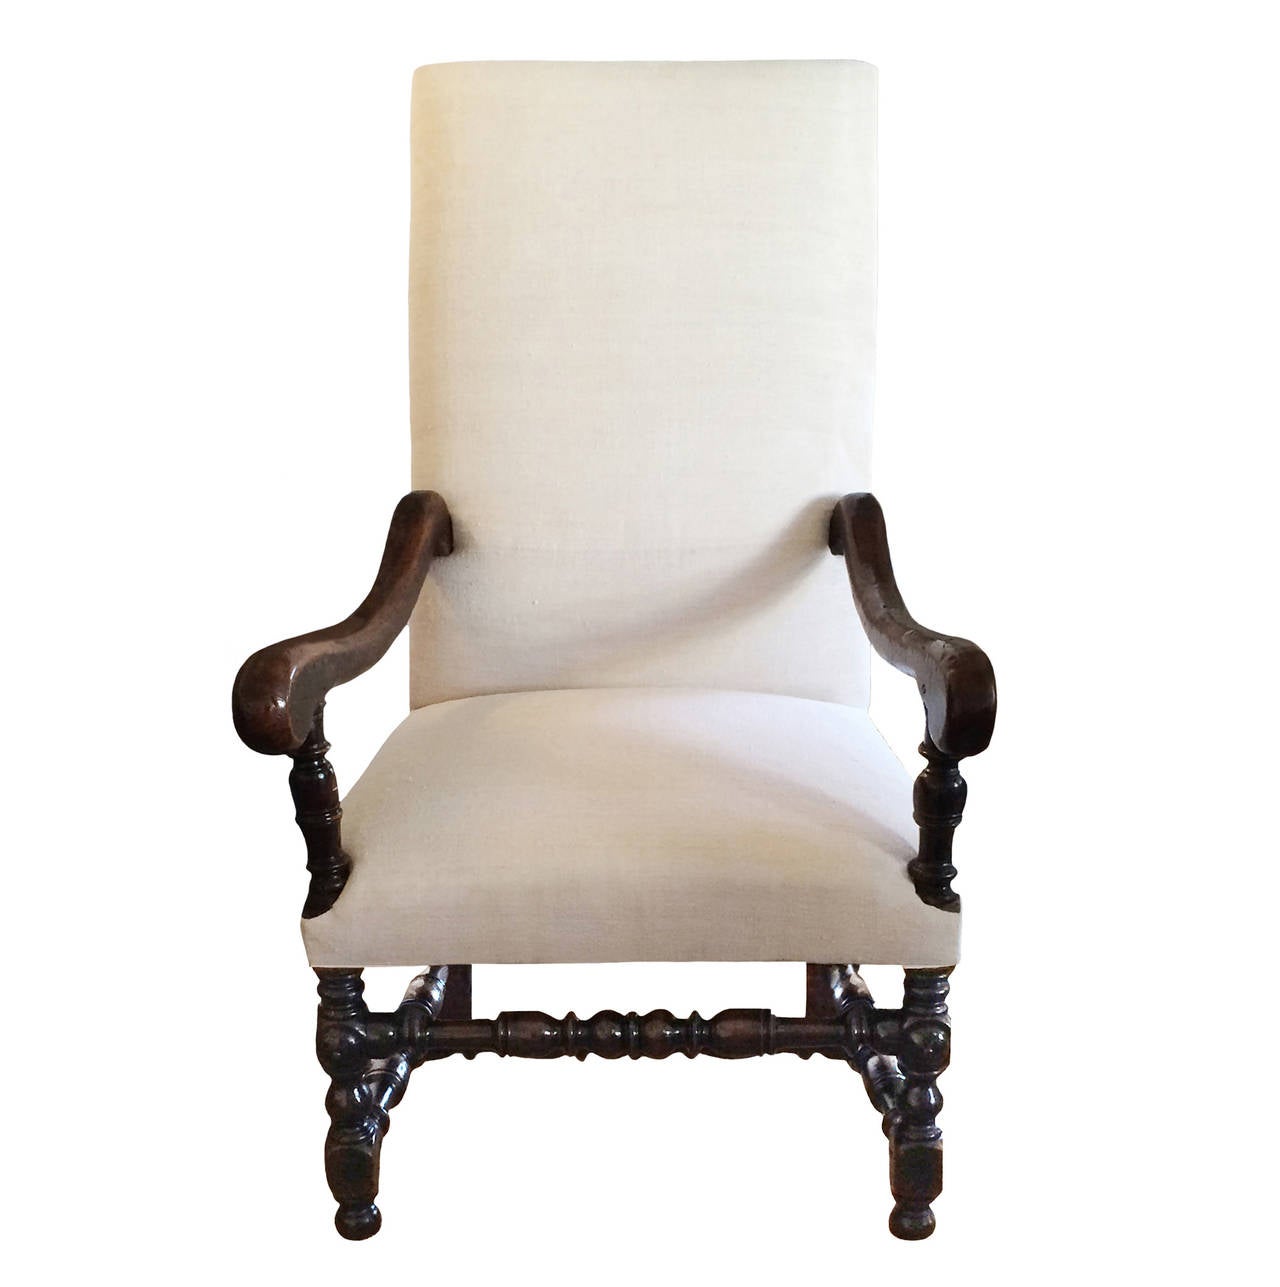 17th century Louis XIII walnut armchair; elongated curved arms; intricately shaped balustrade legs and stretcher; upholstered in vintage French linen.